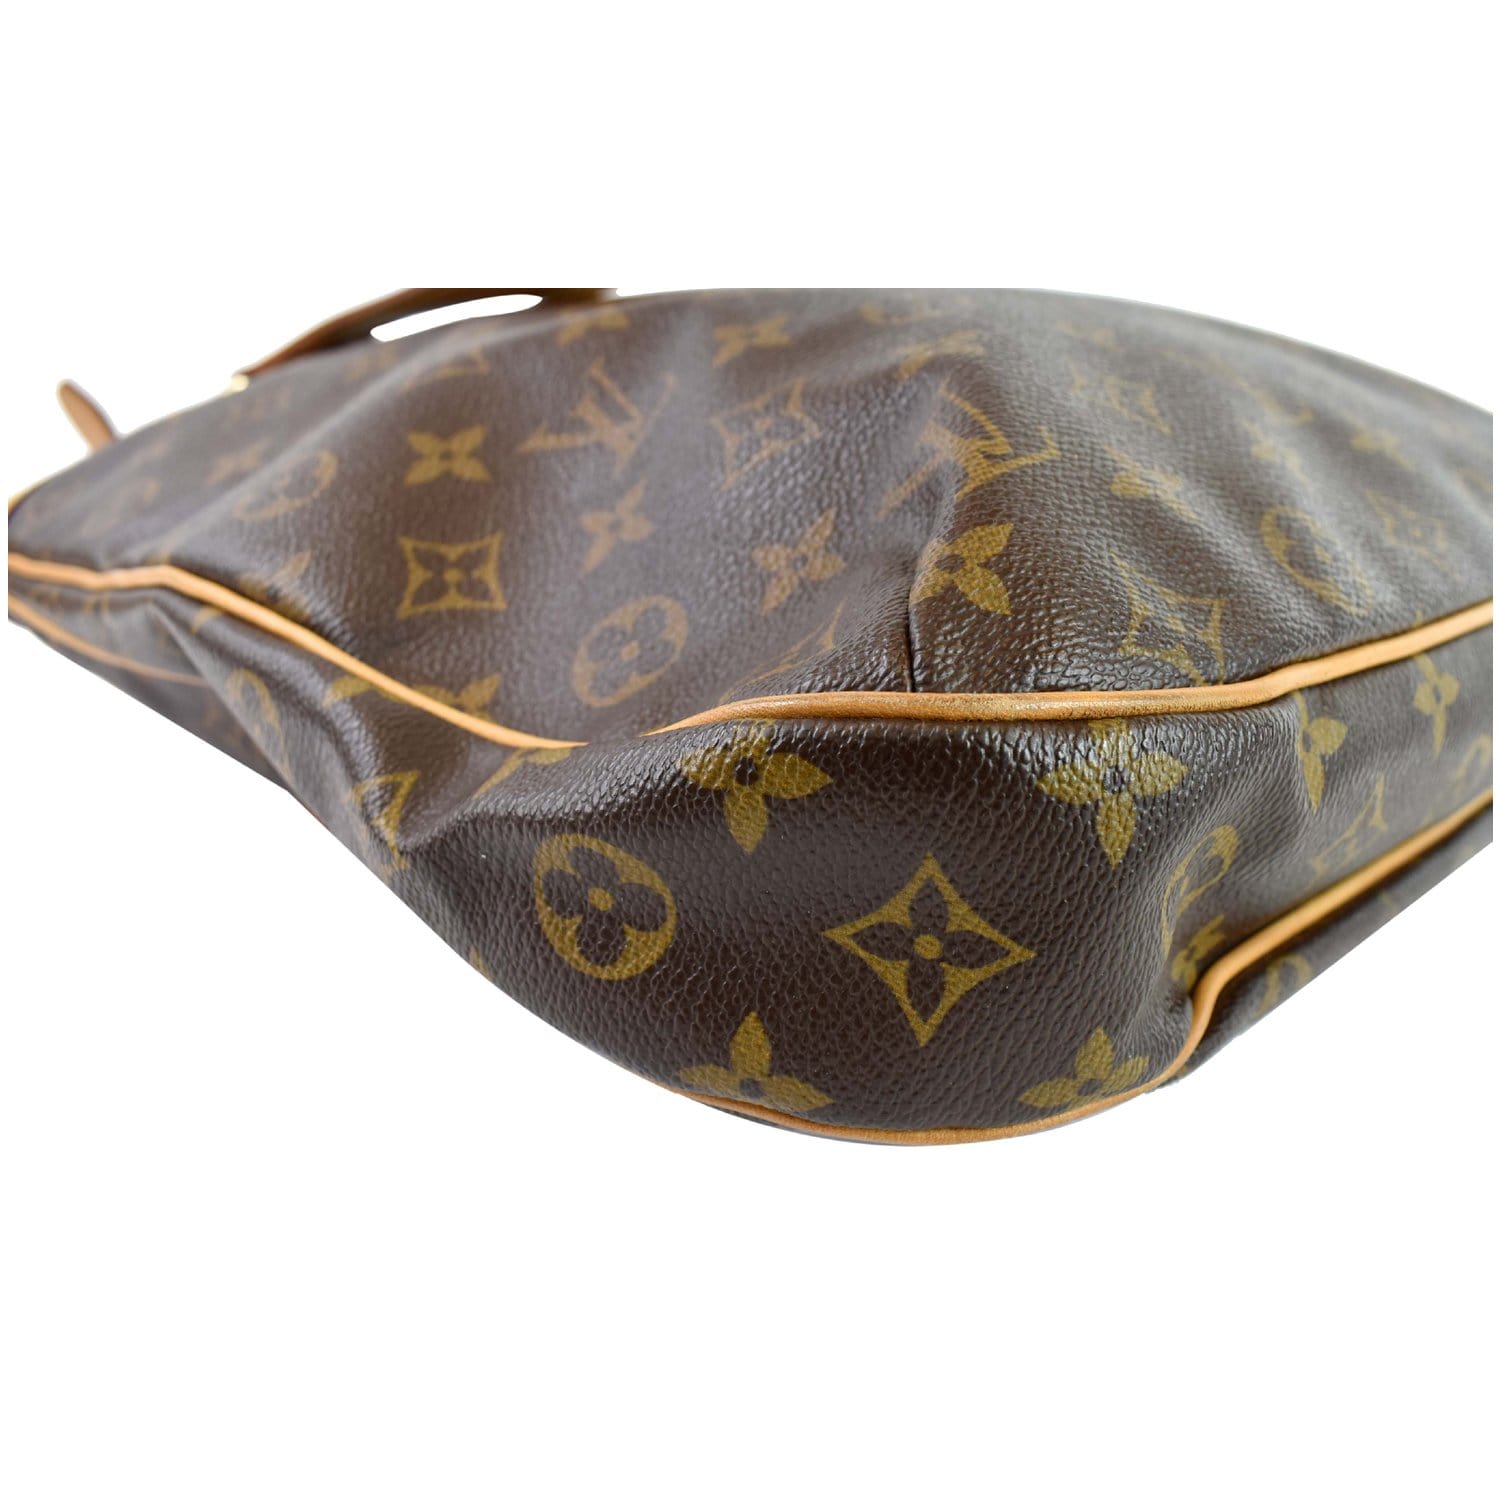 LOUIS VUITTON Odeon GM shoulder tote bag M56388｜Product  Code：2101214455568｜BRAND OFF Online Store